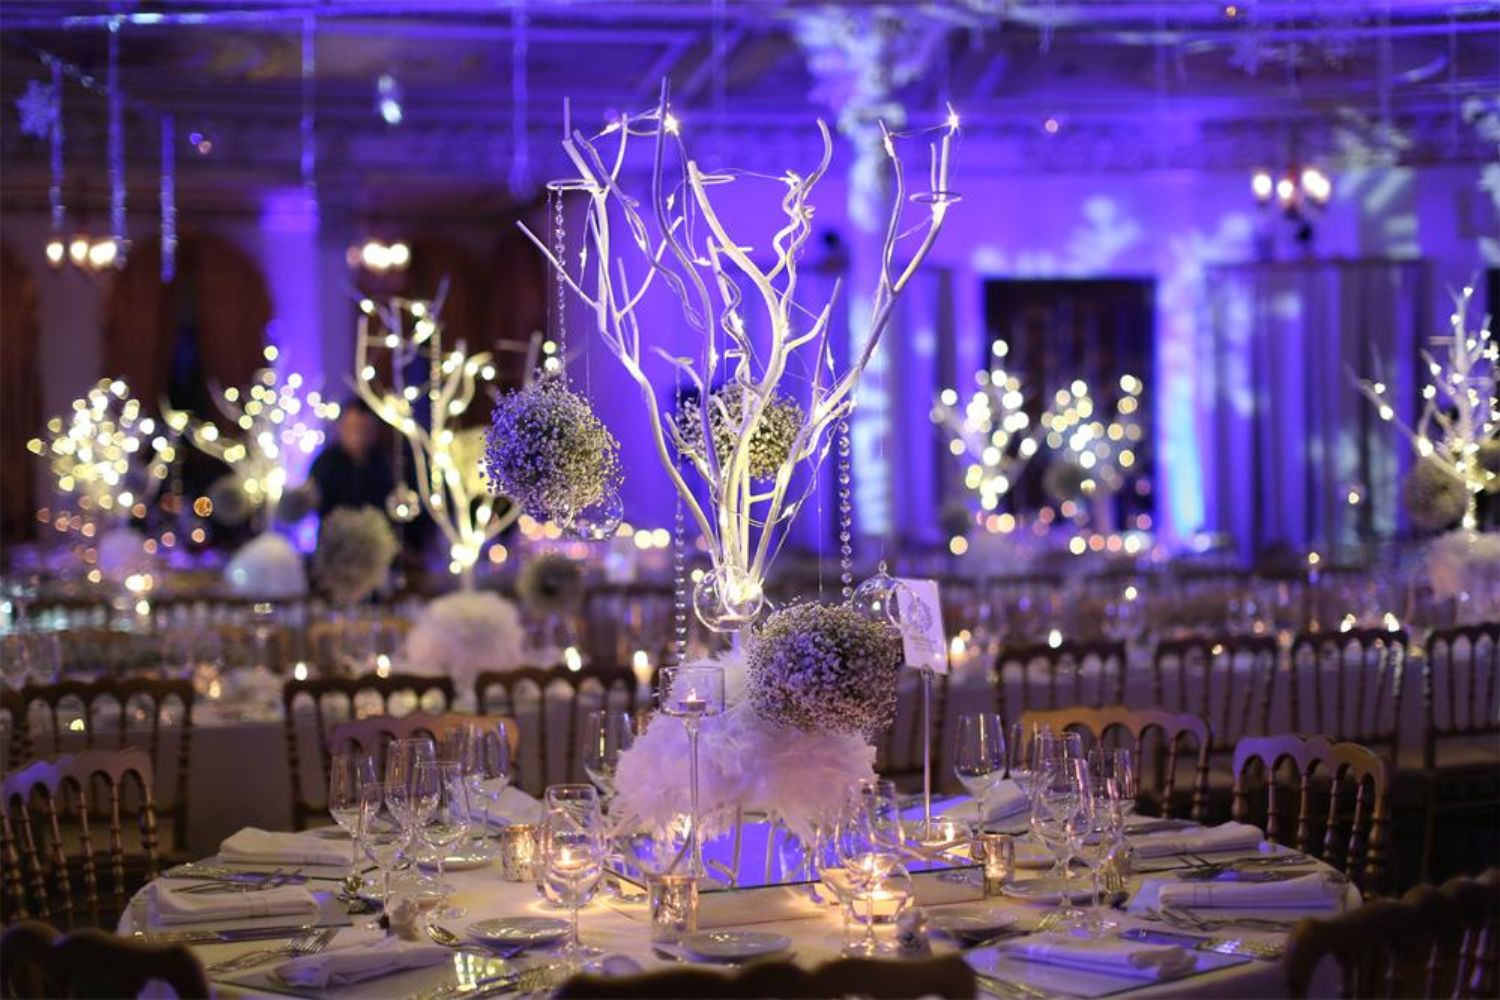 lights wedding decorations  photo by Olena Andreychuk on shutterstock